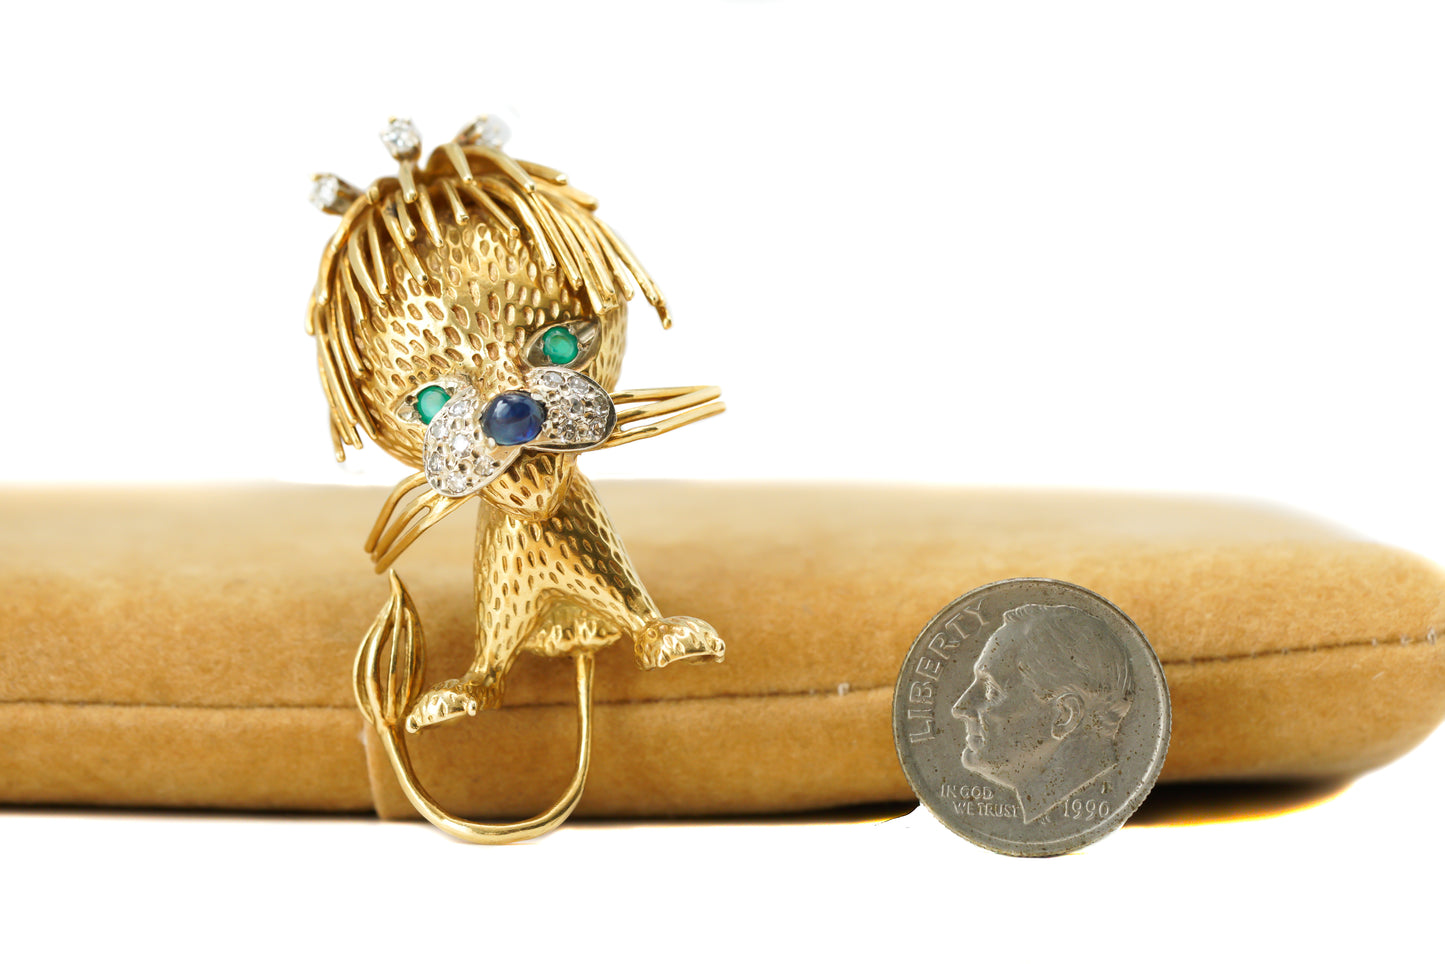 18k Gold Lion Brooch with Diamonds Emeralds Sapphires